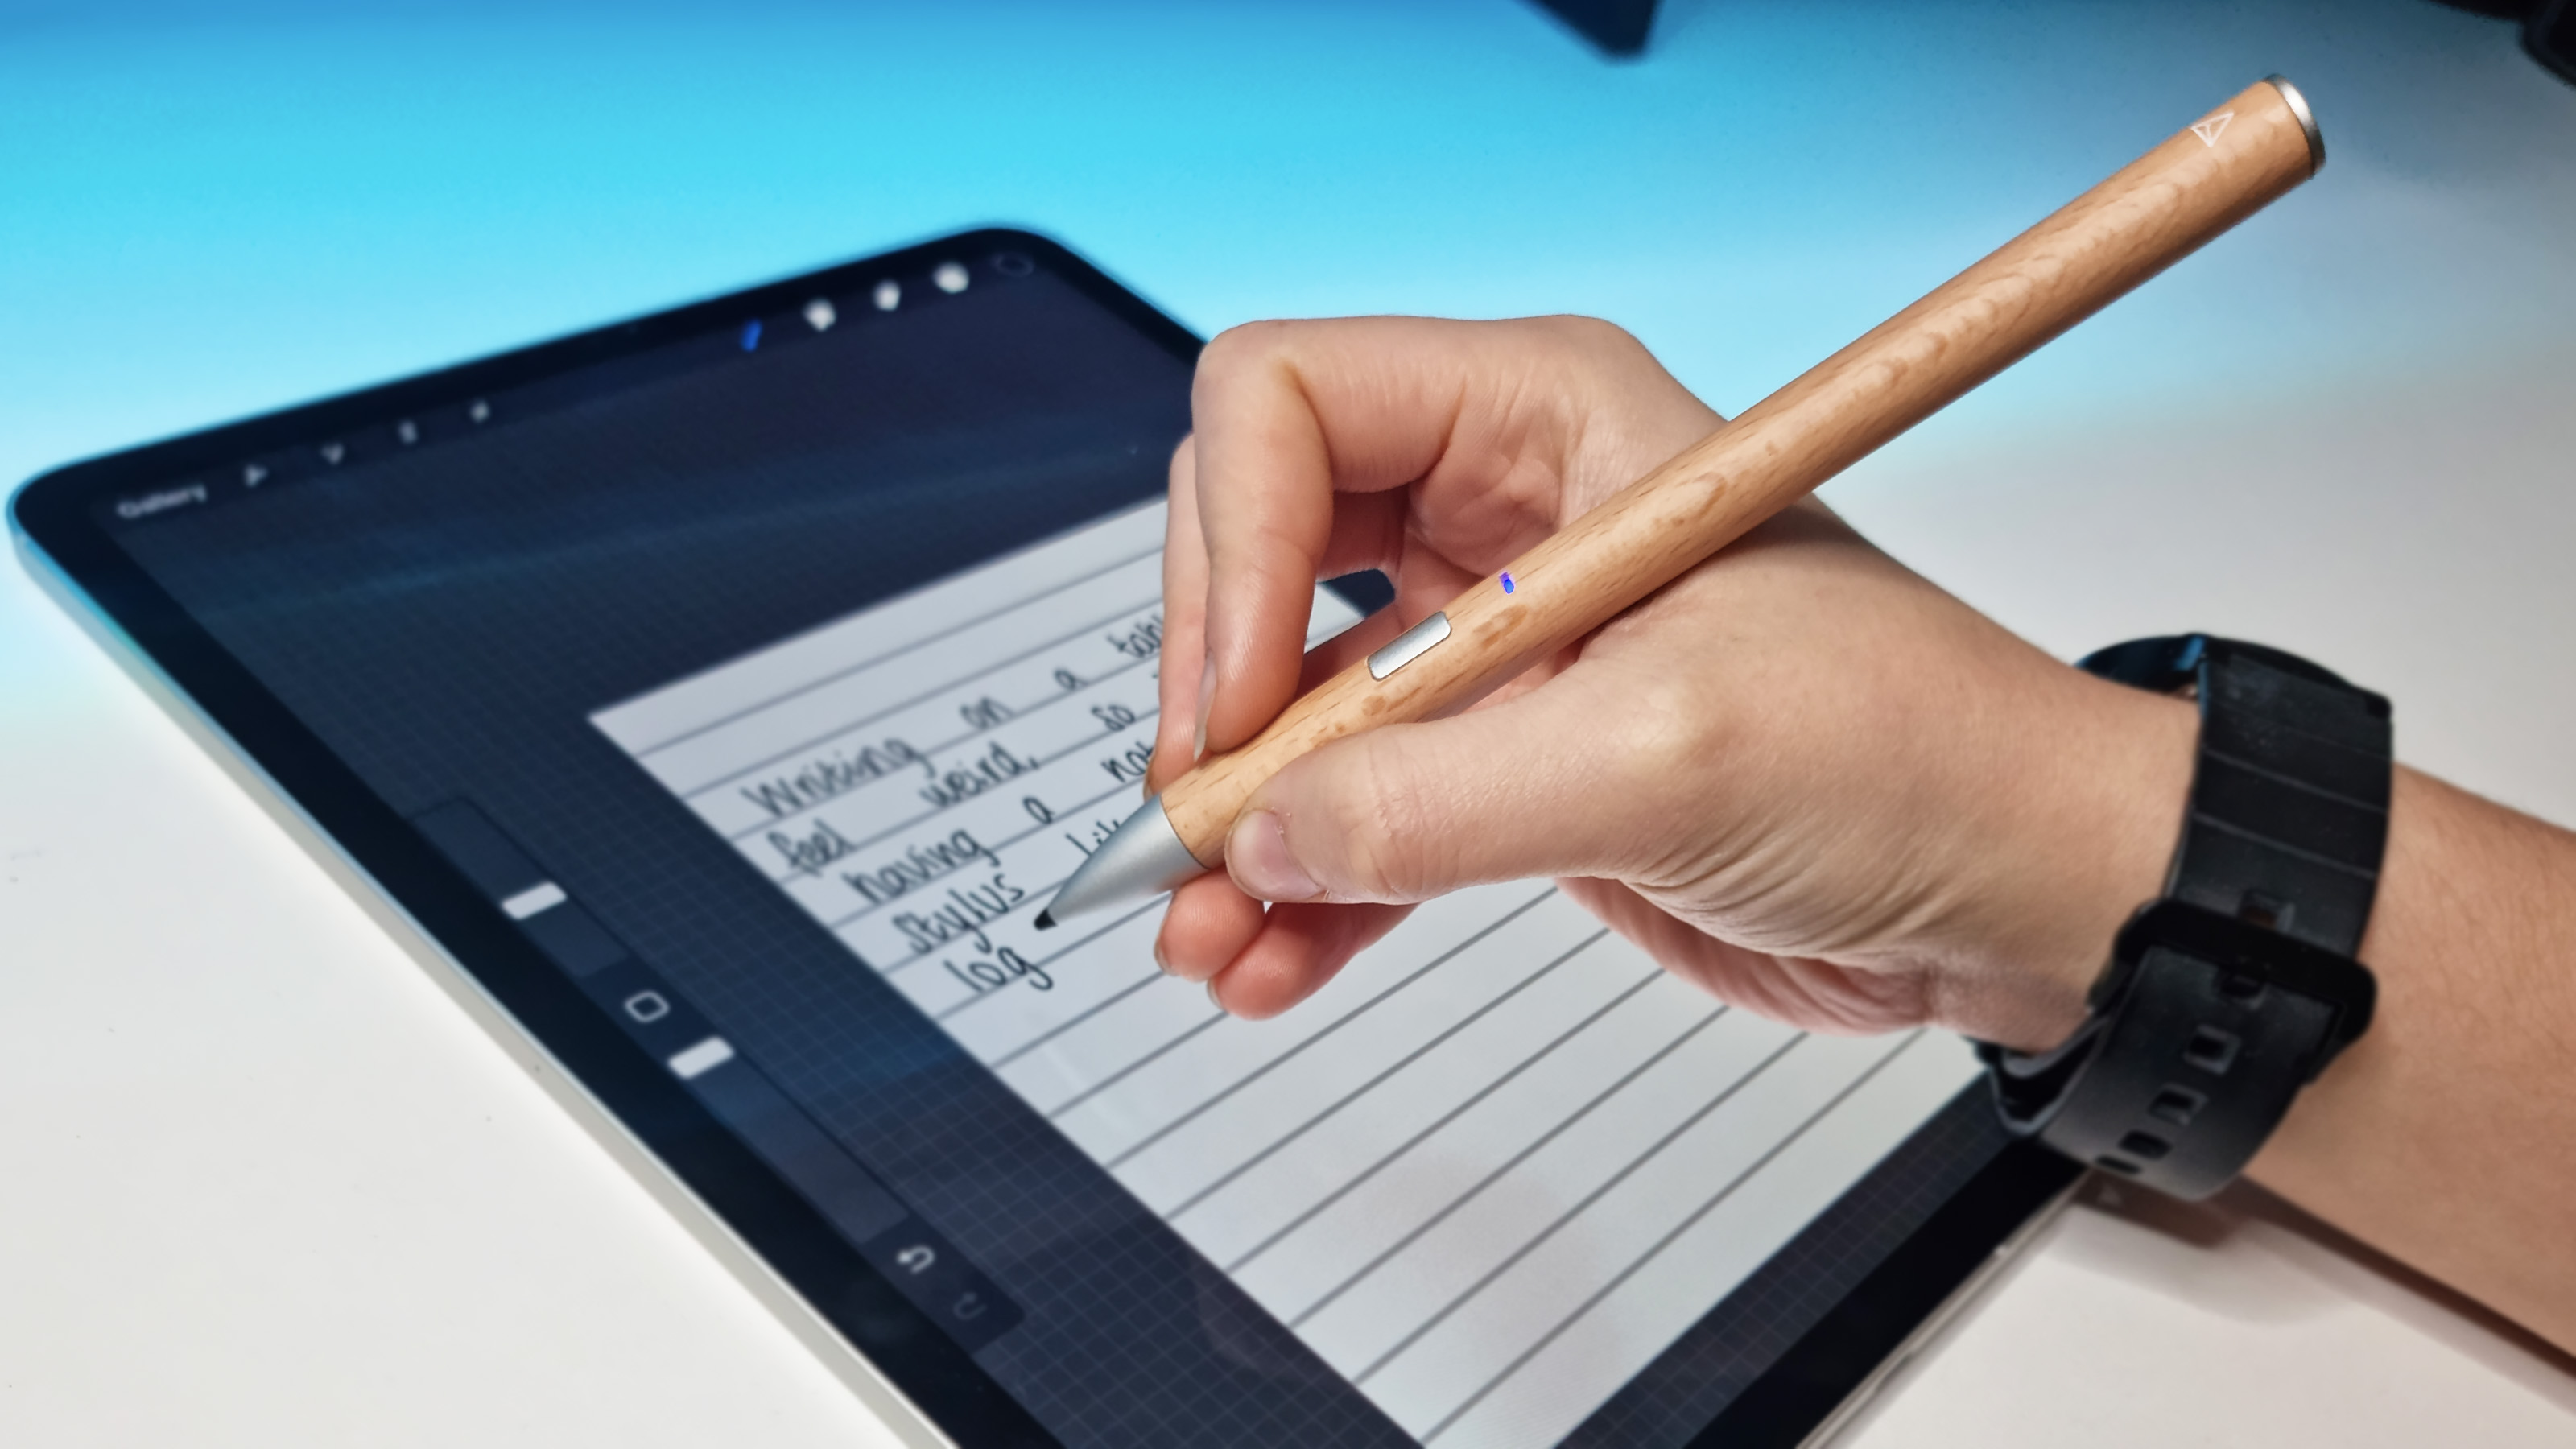 A photo of the Adonit Log Stylus being used on an iPad on a desk